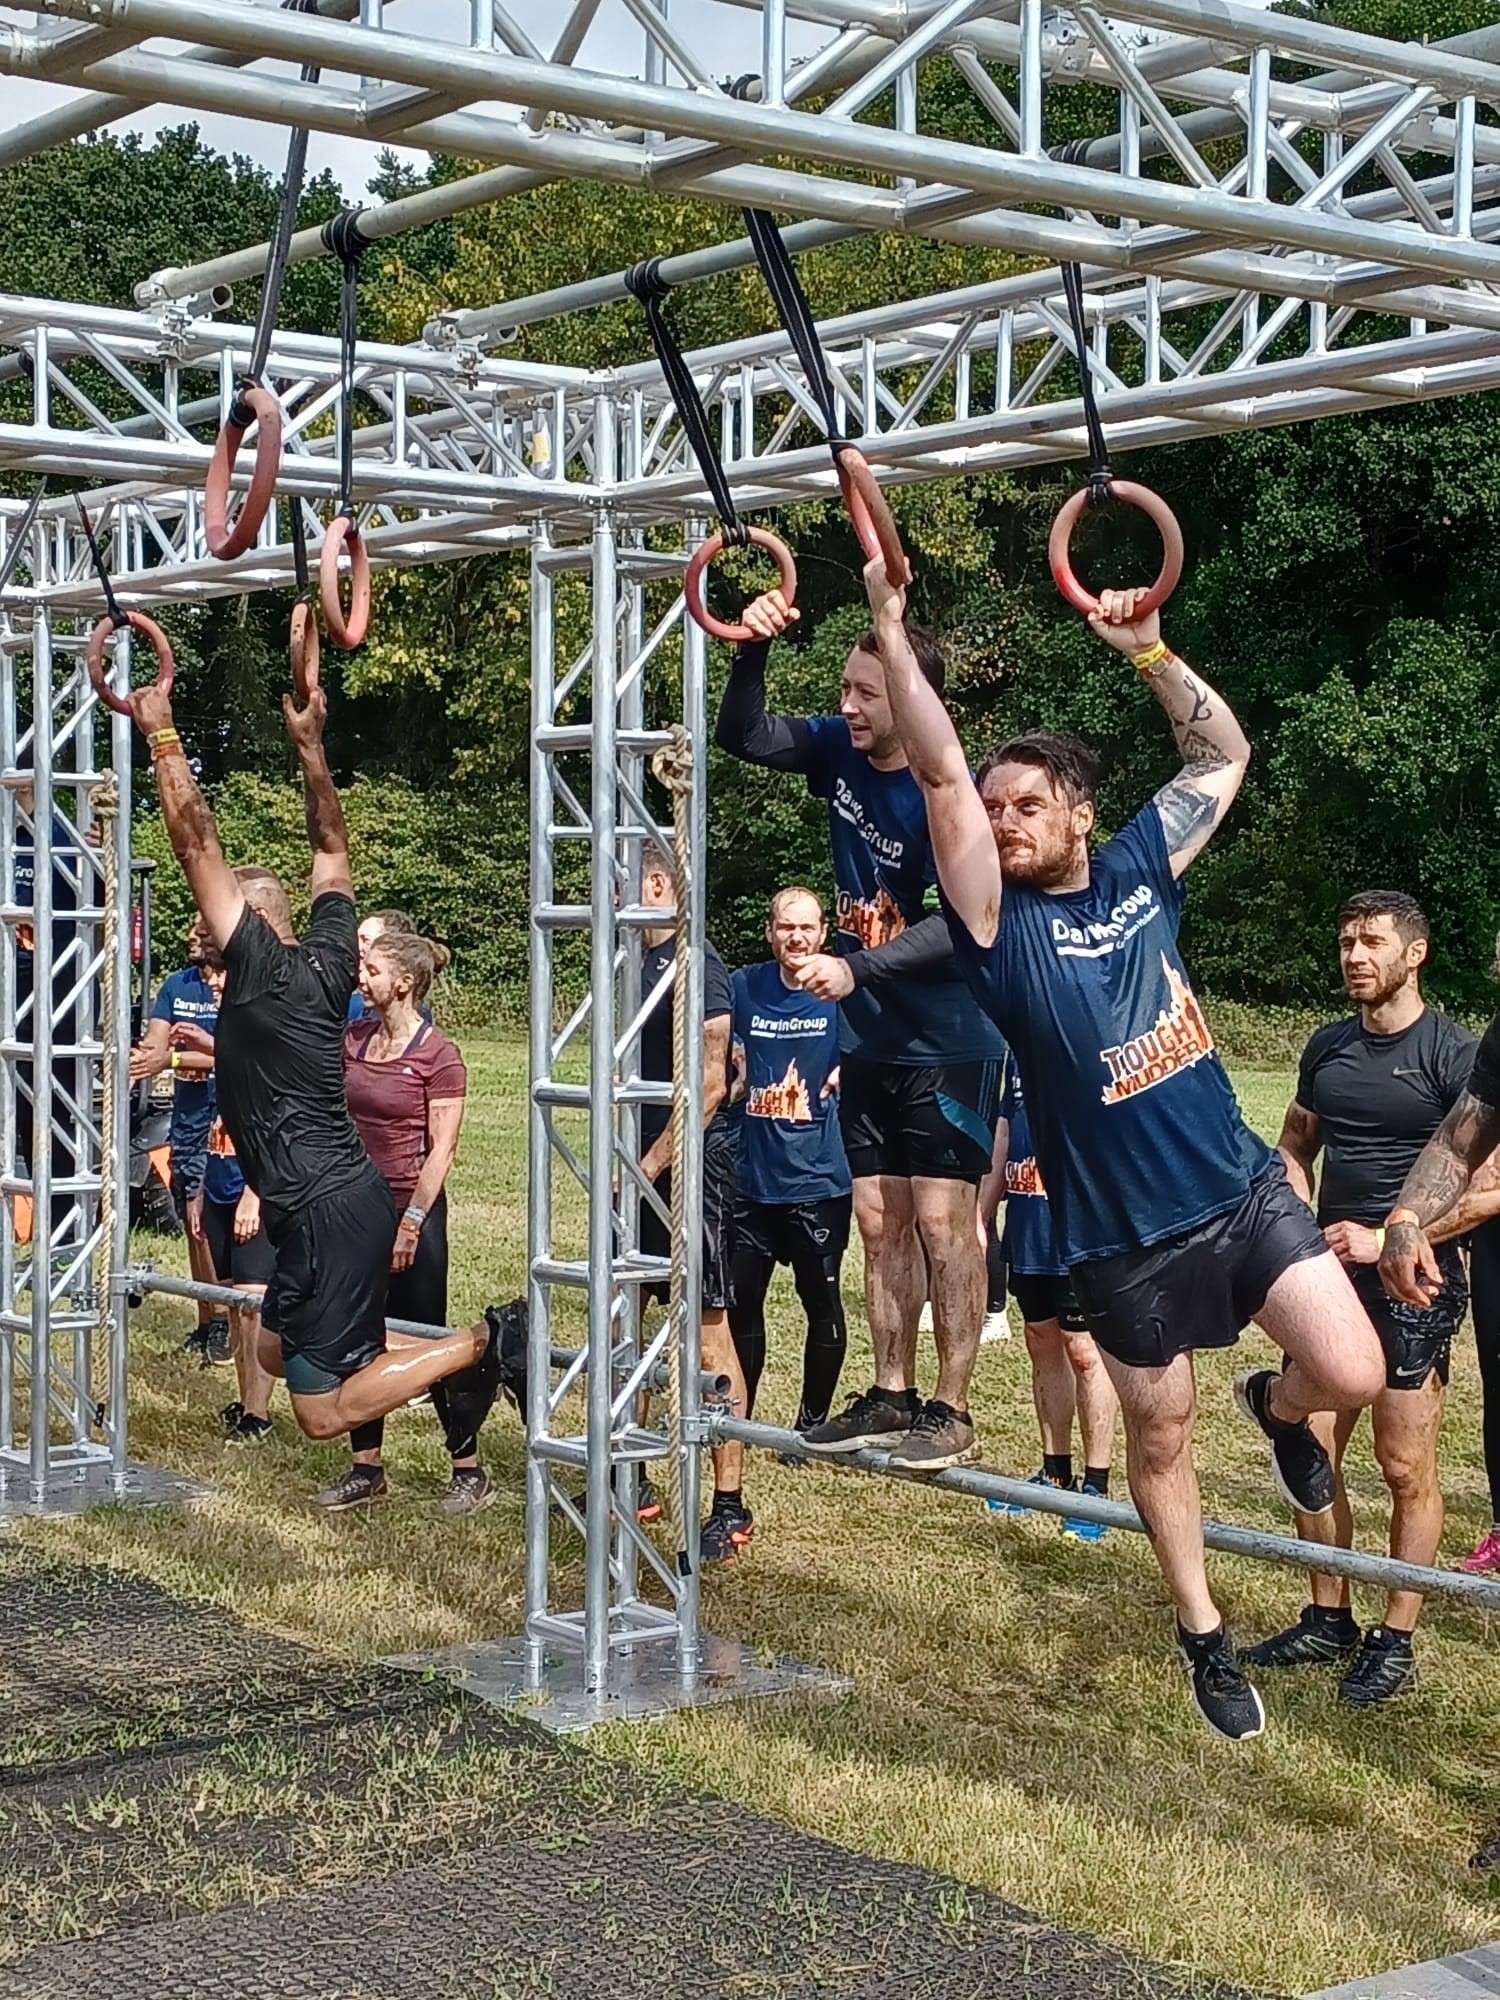 A 'hang tough' obstacle from the course. People are queueing to take part while three people are swinging from one hoop to the next.